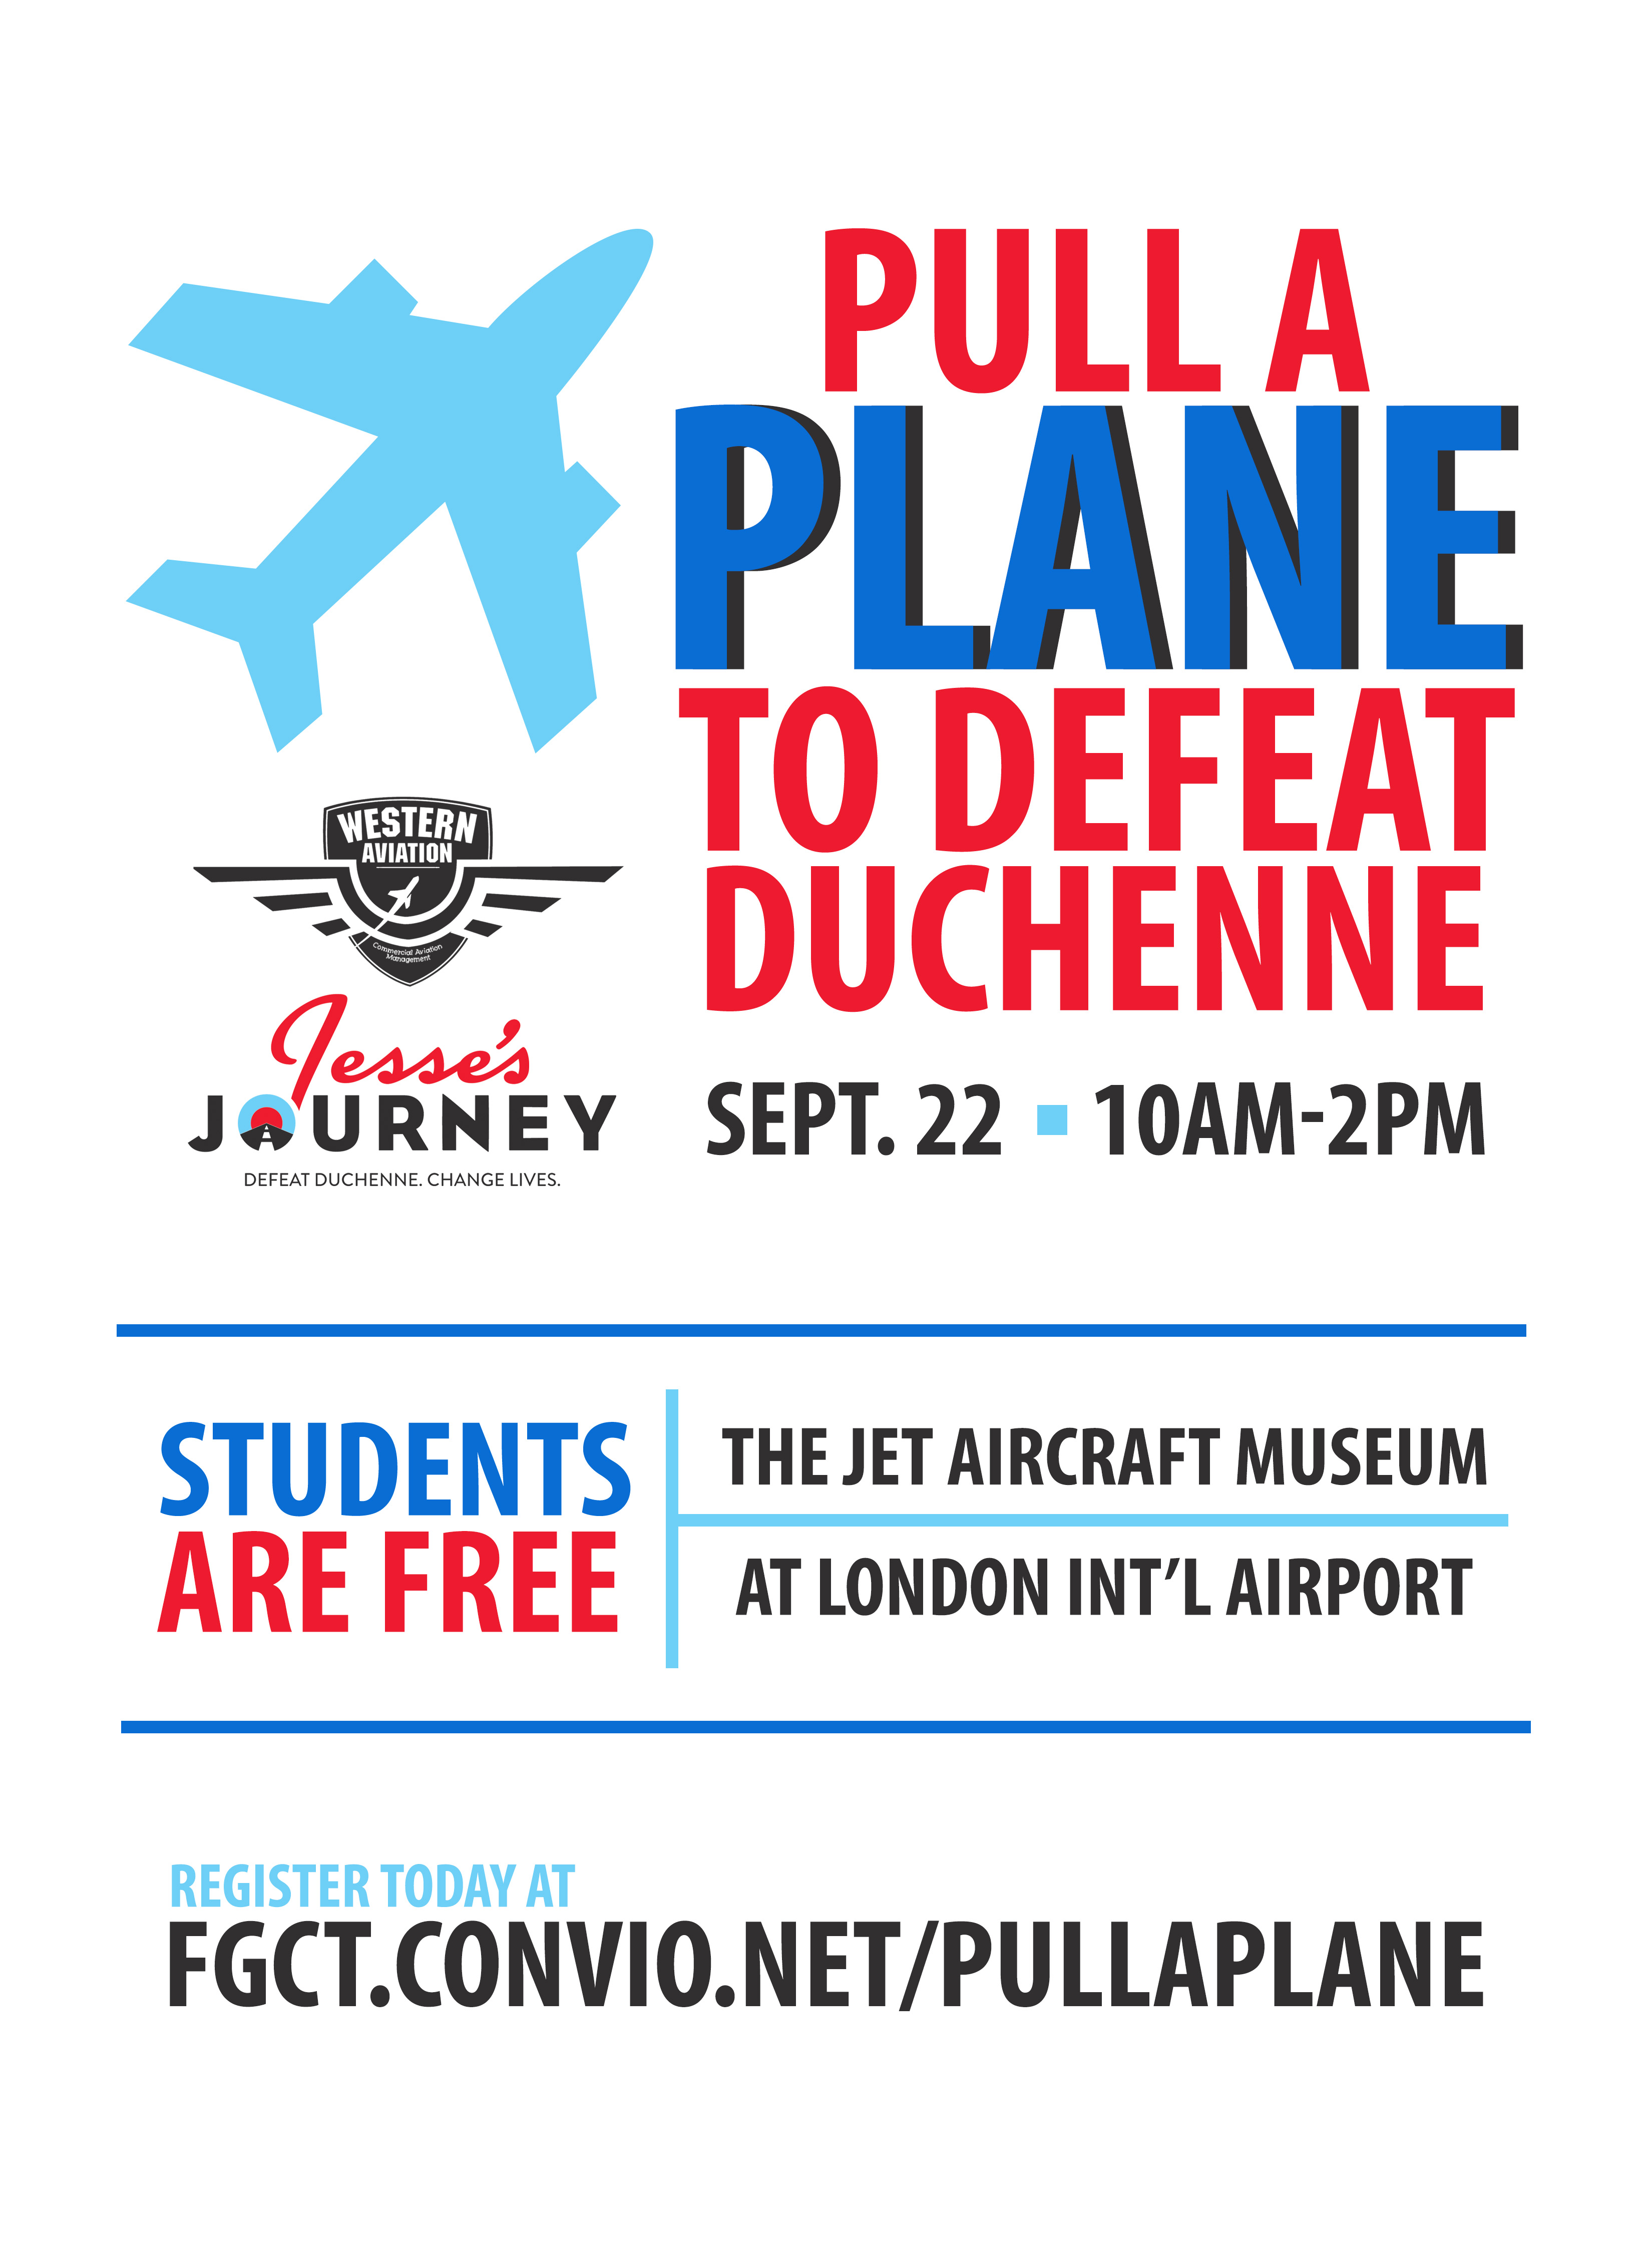 Pull A Plane advertising poster